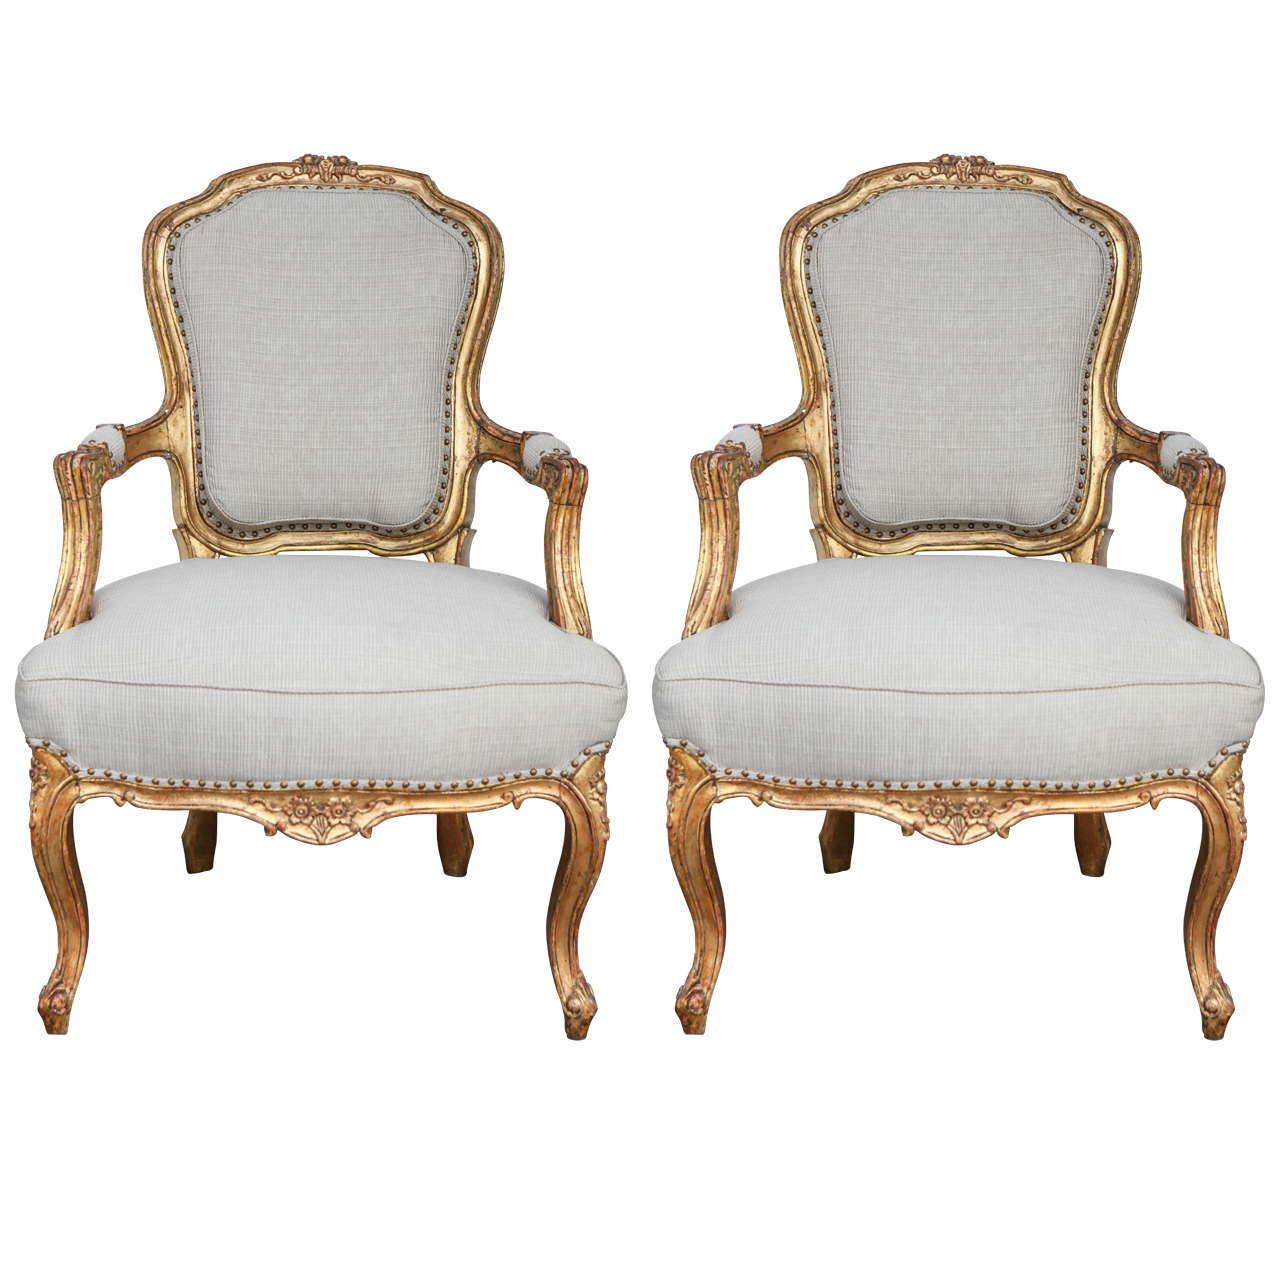 Pair of 19th Century French Carved Giltwood Armchairs For Sale